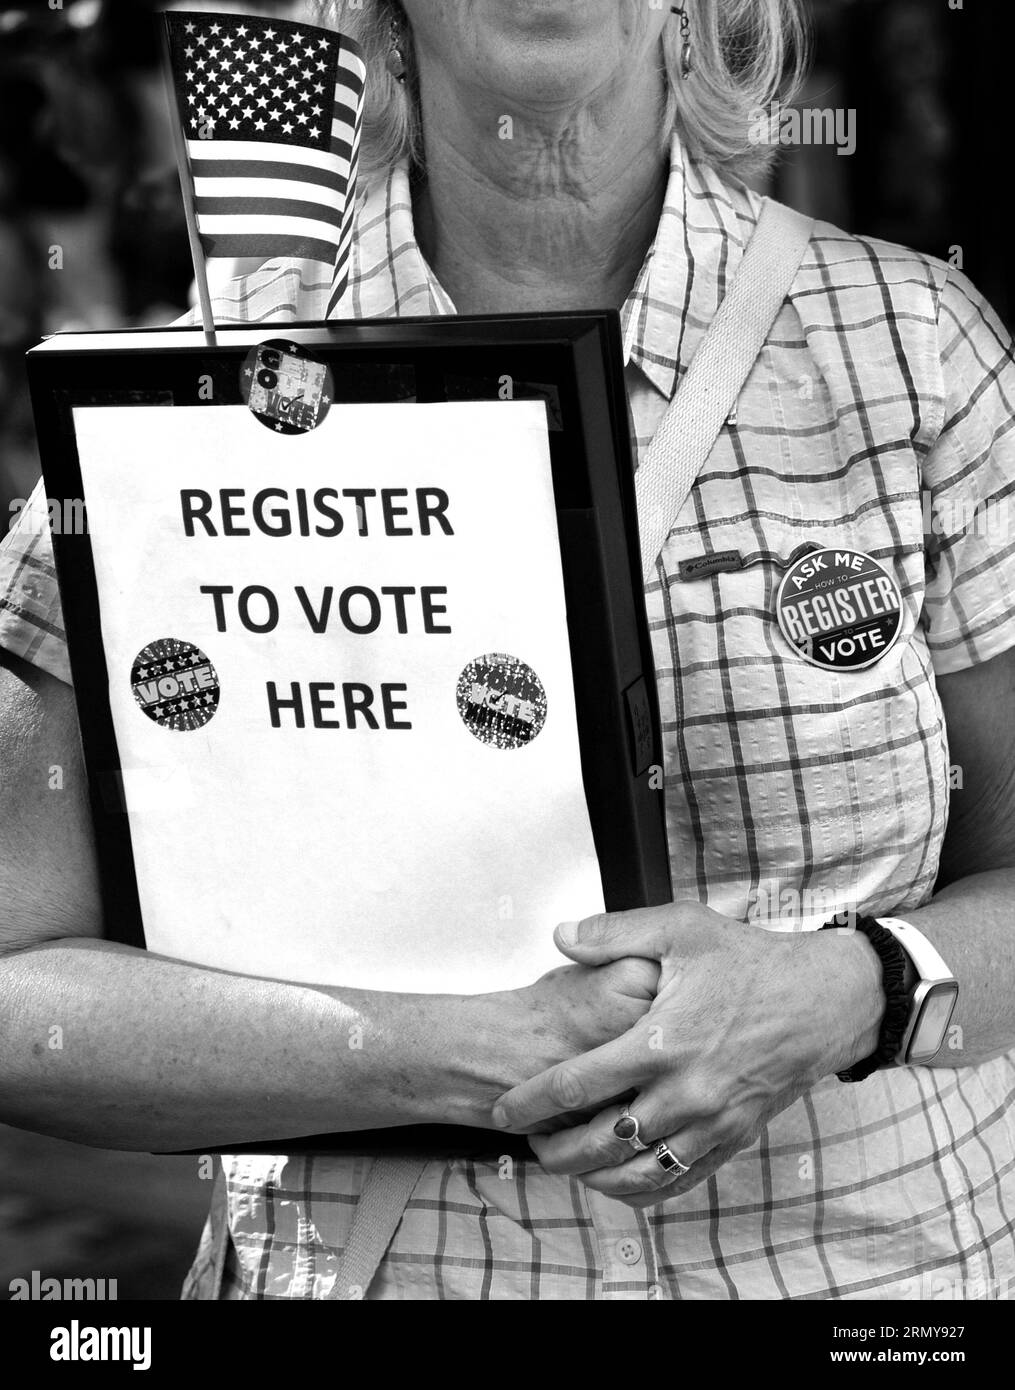 A volunteer offers an opportunity for residents and visitors to register to vote in Santa Fe, New Mexico. Stock Photo